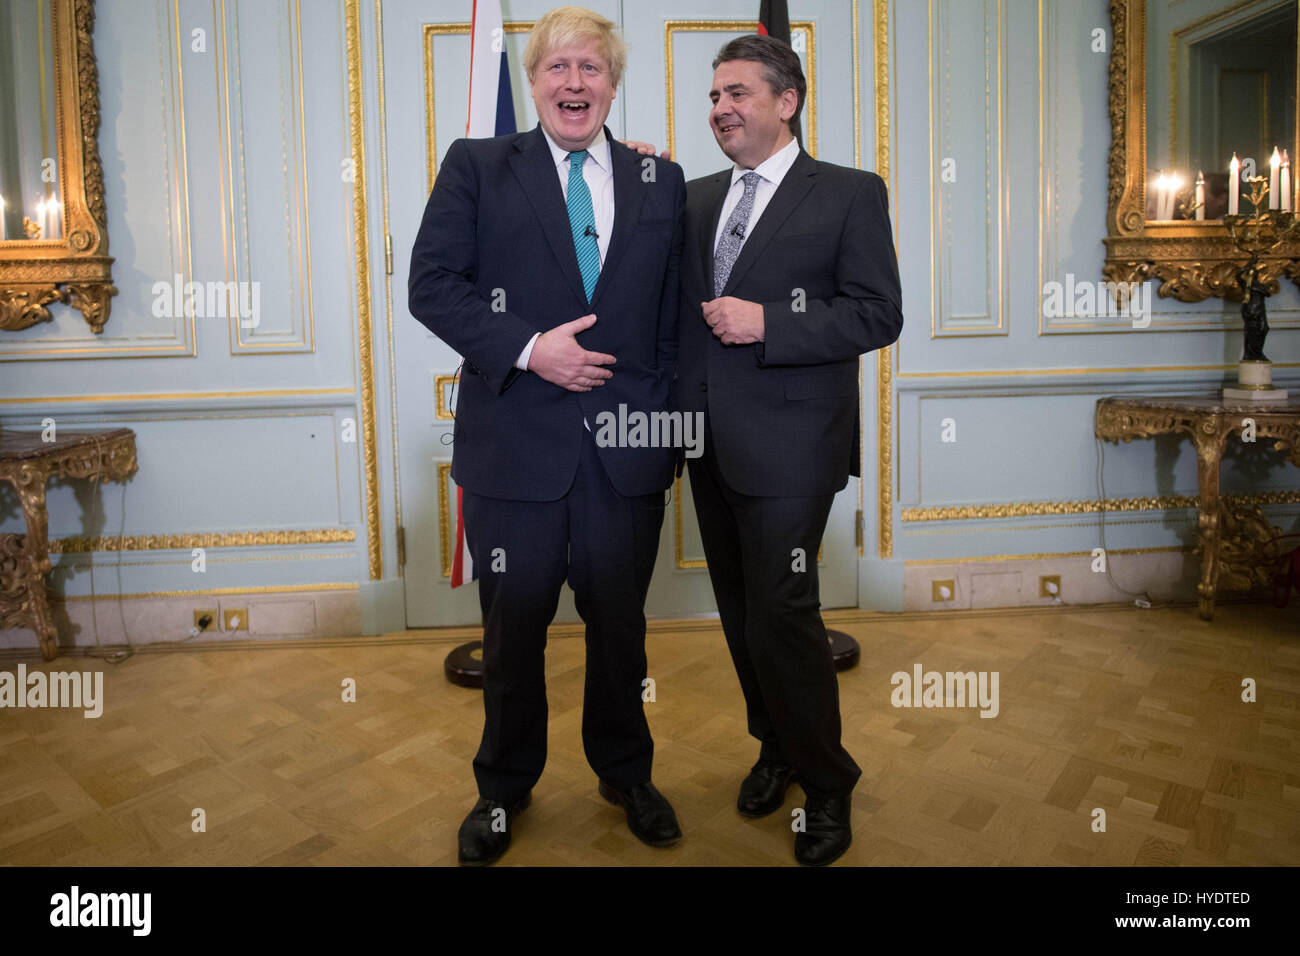 Foreign Secretary Boris Johnson meets his German counterpart Foreign Minister Sigmar Gabriel at his London residence where they discussed Syria and Brexit. Stock Photo